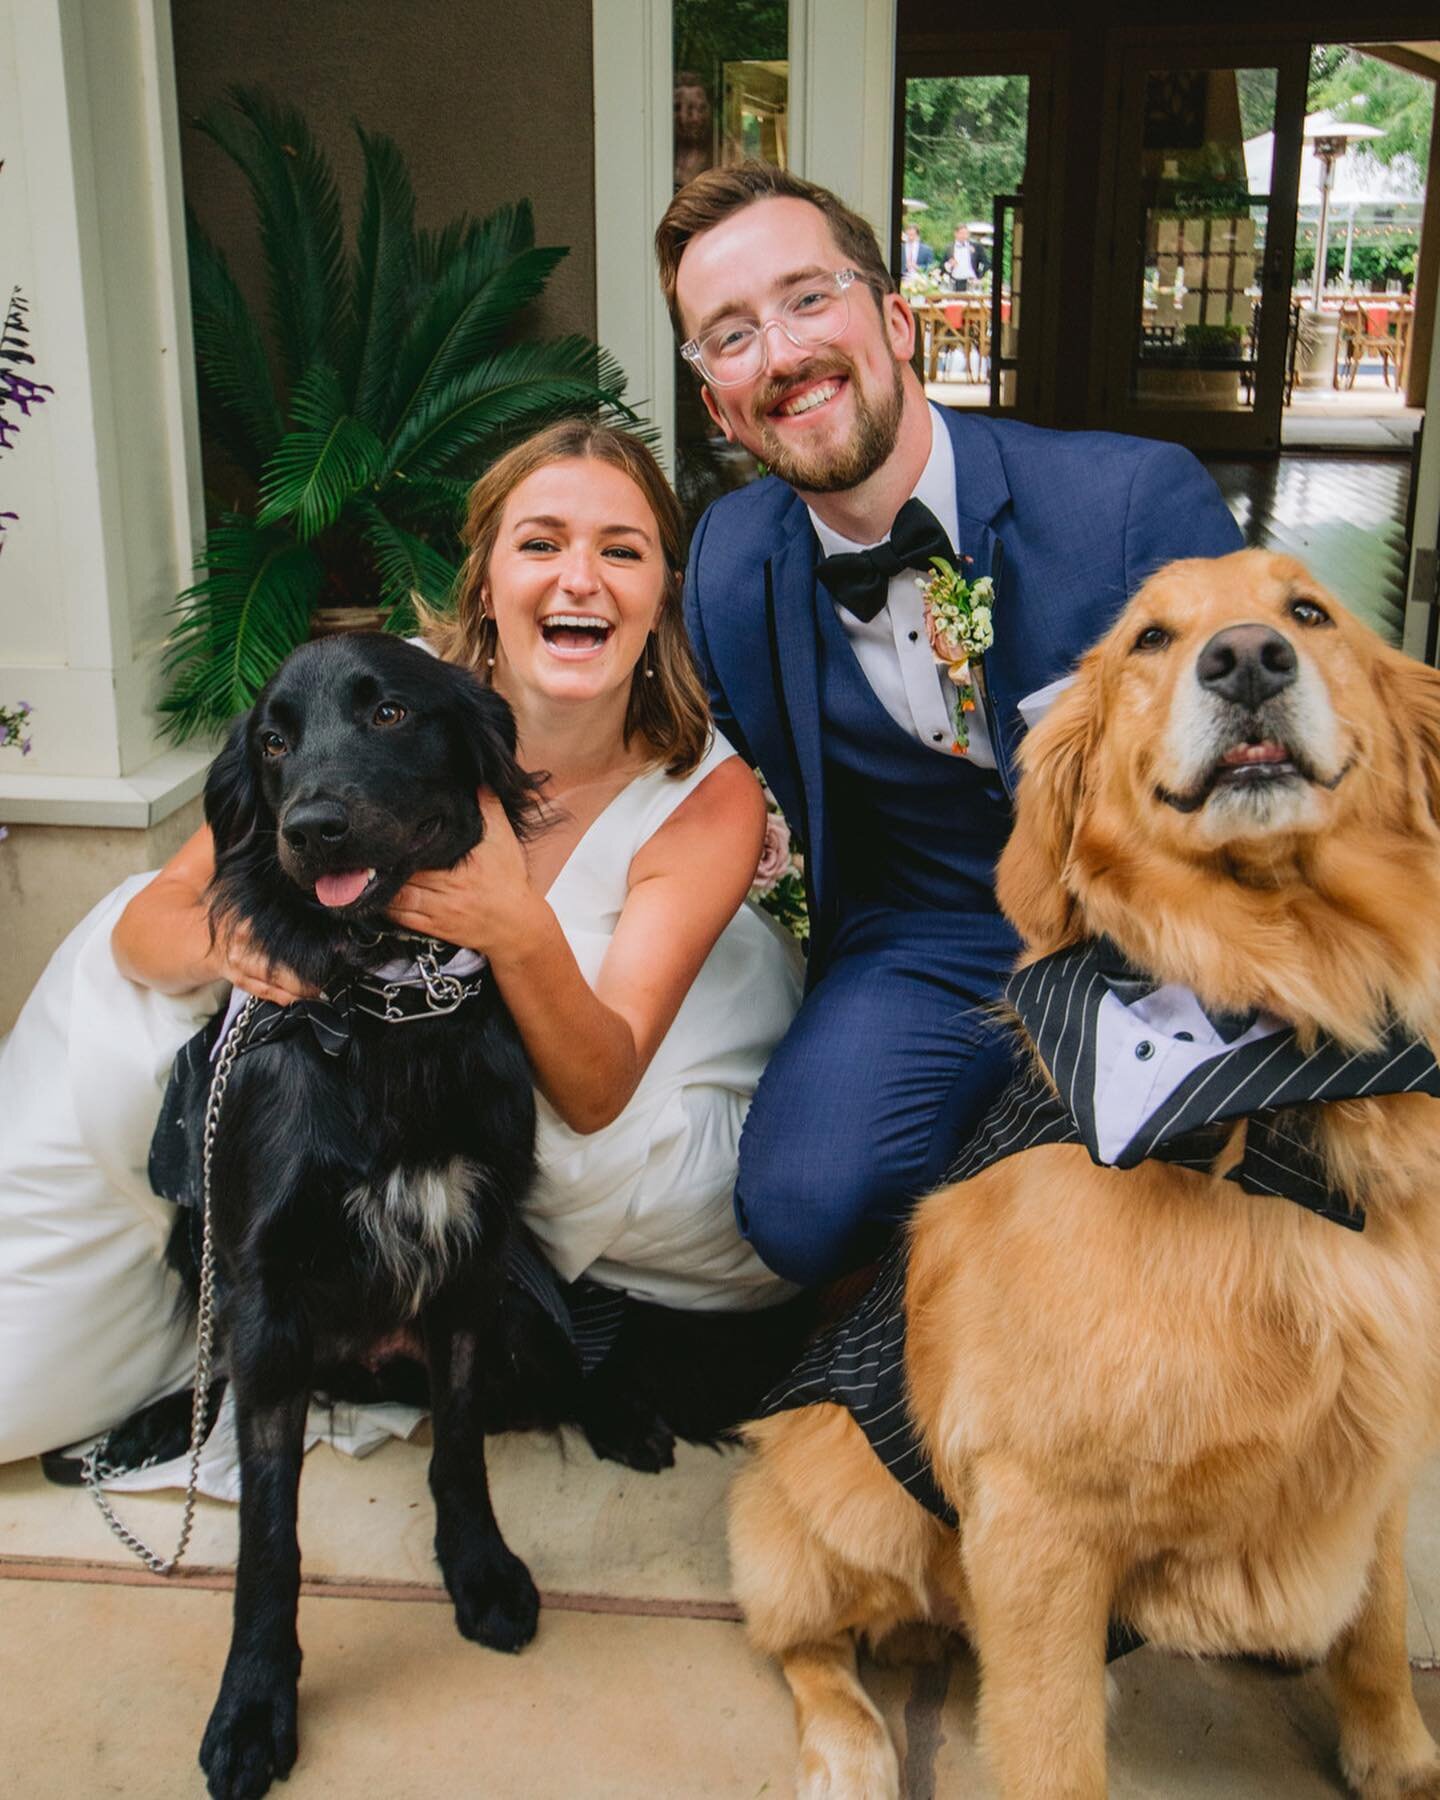 HAPPY NATIONAL PETS DAY
⠀⠀⠀⠀⠀⠀⠀⠀⠀
We had to take this opportunity to share some shots of these two good fur babies from last years wedding! Are they not they cutest pair!

#nationalpetday